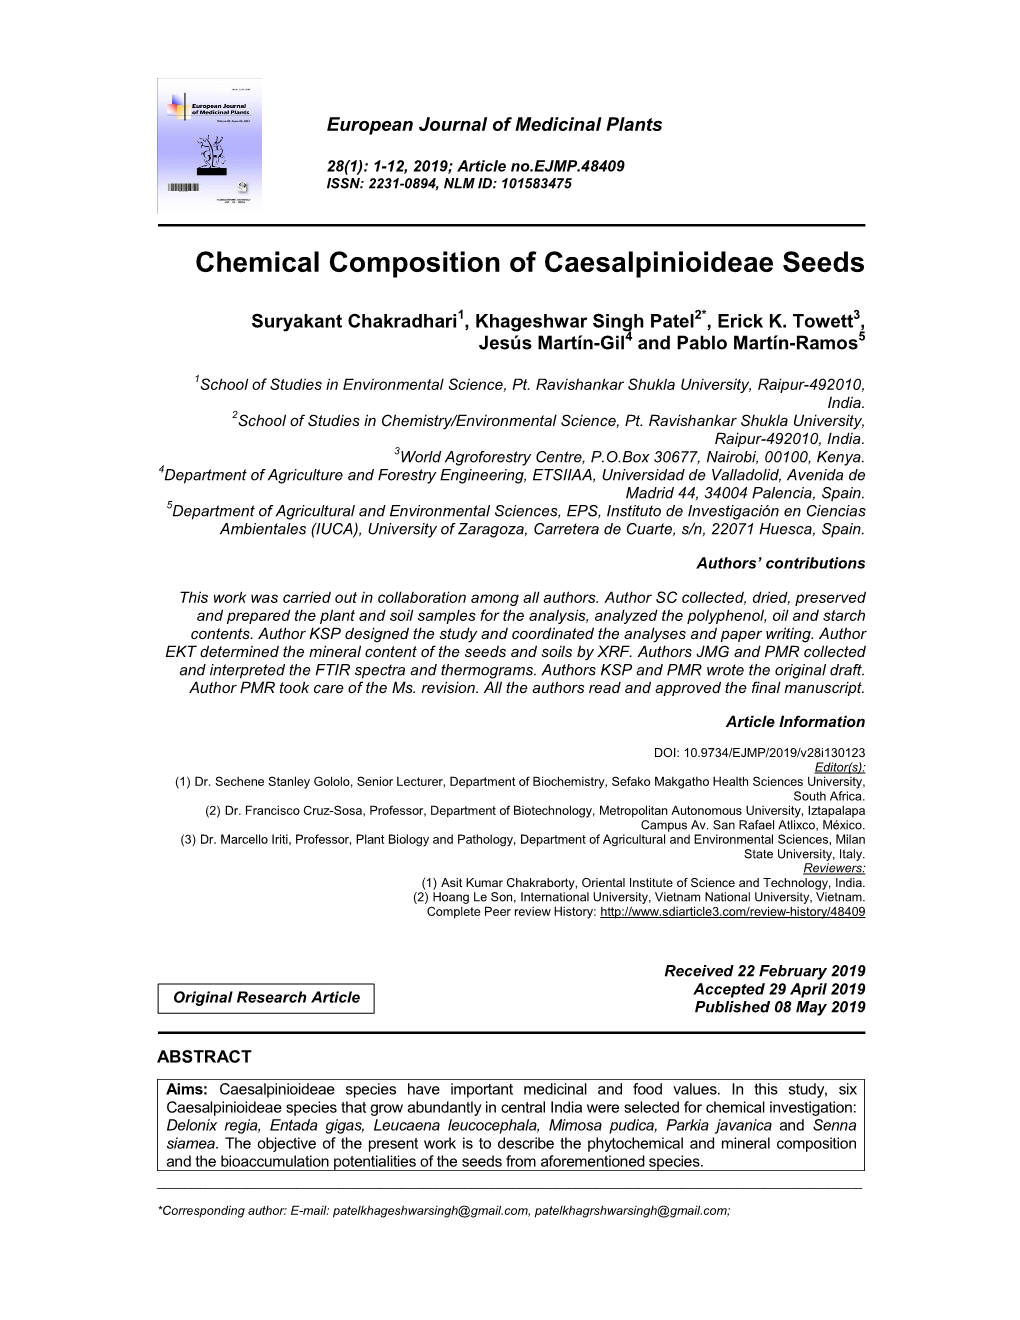 Chemical Composition of Caesalpinioideae Seeds